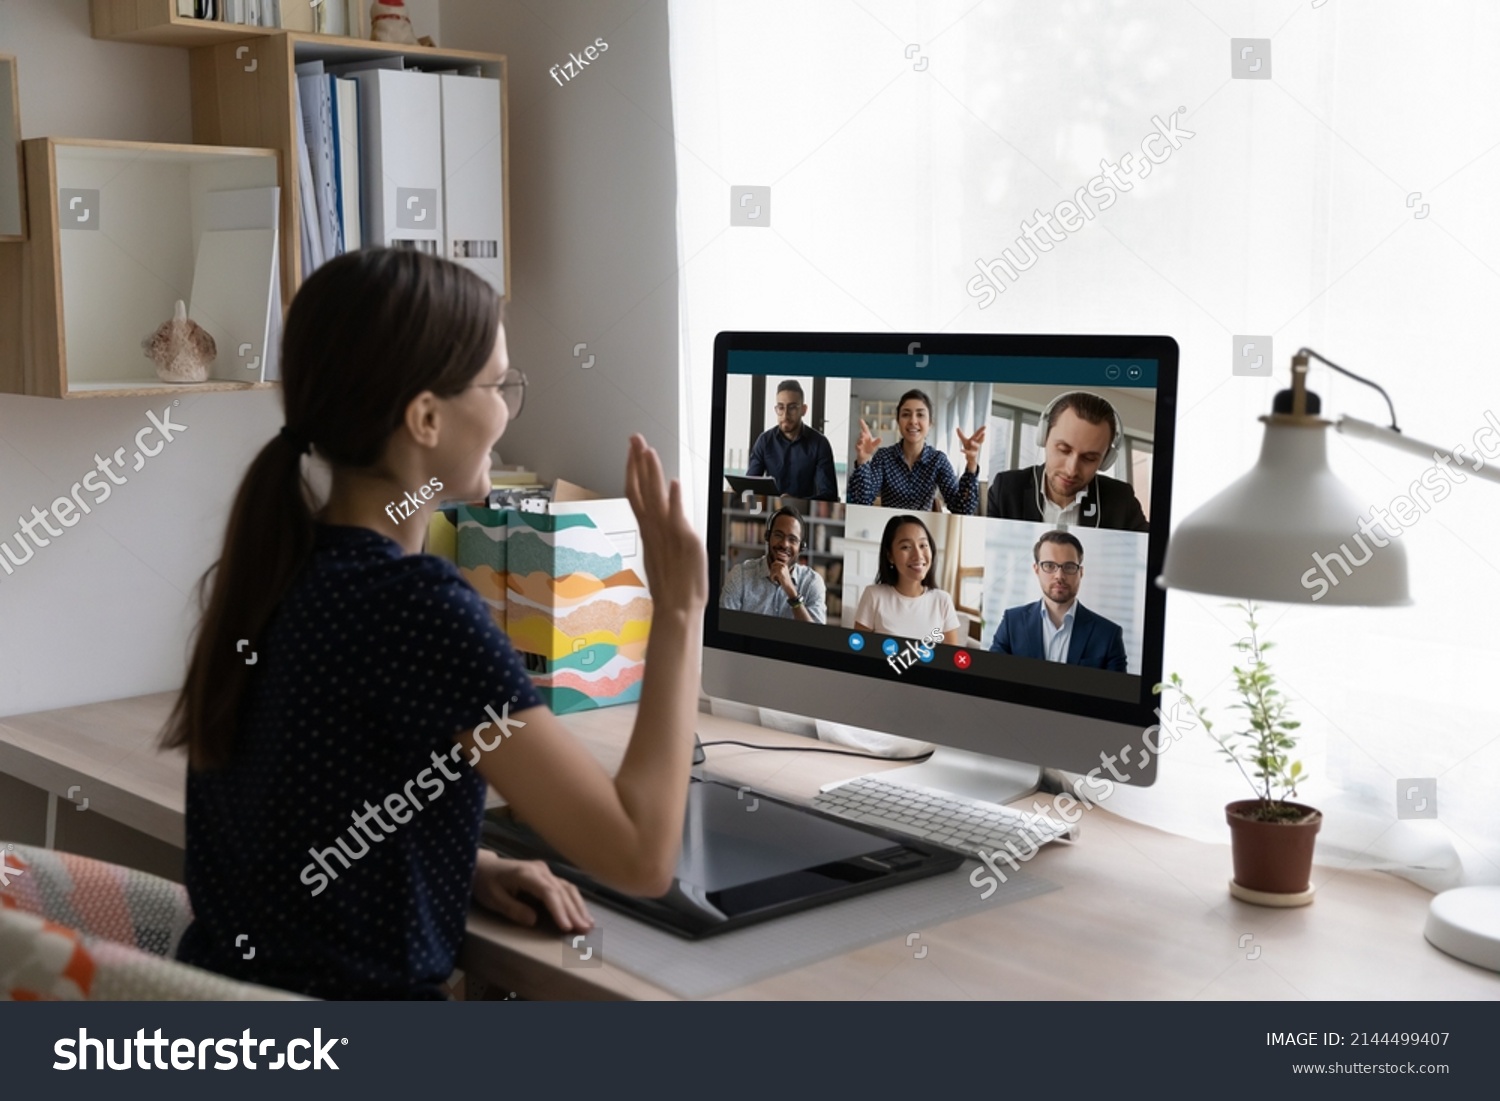 Young woman sit at desk in front of pc, looks at screen, wave hand greeting diverse friends, multinational colleagues start or finish group video call. Virtual meeting, remote communication concept #2144499407